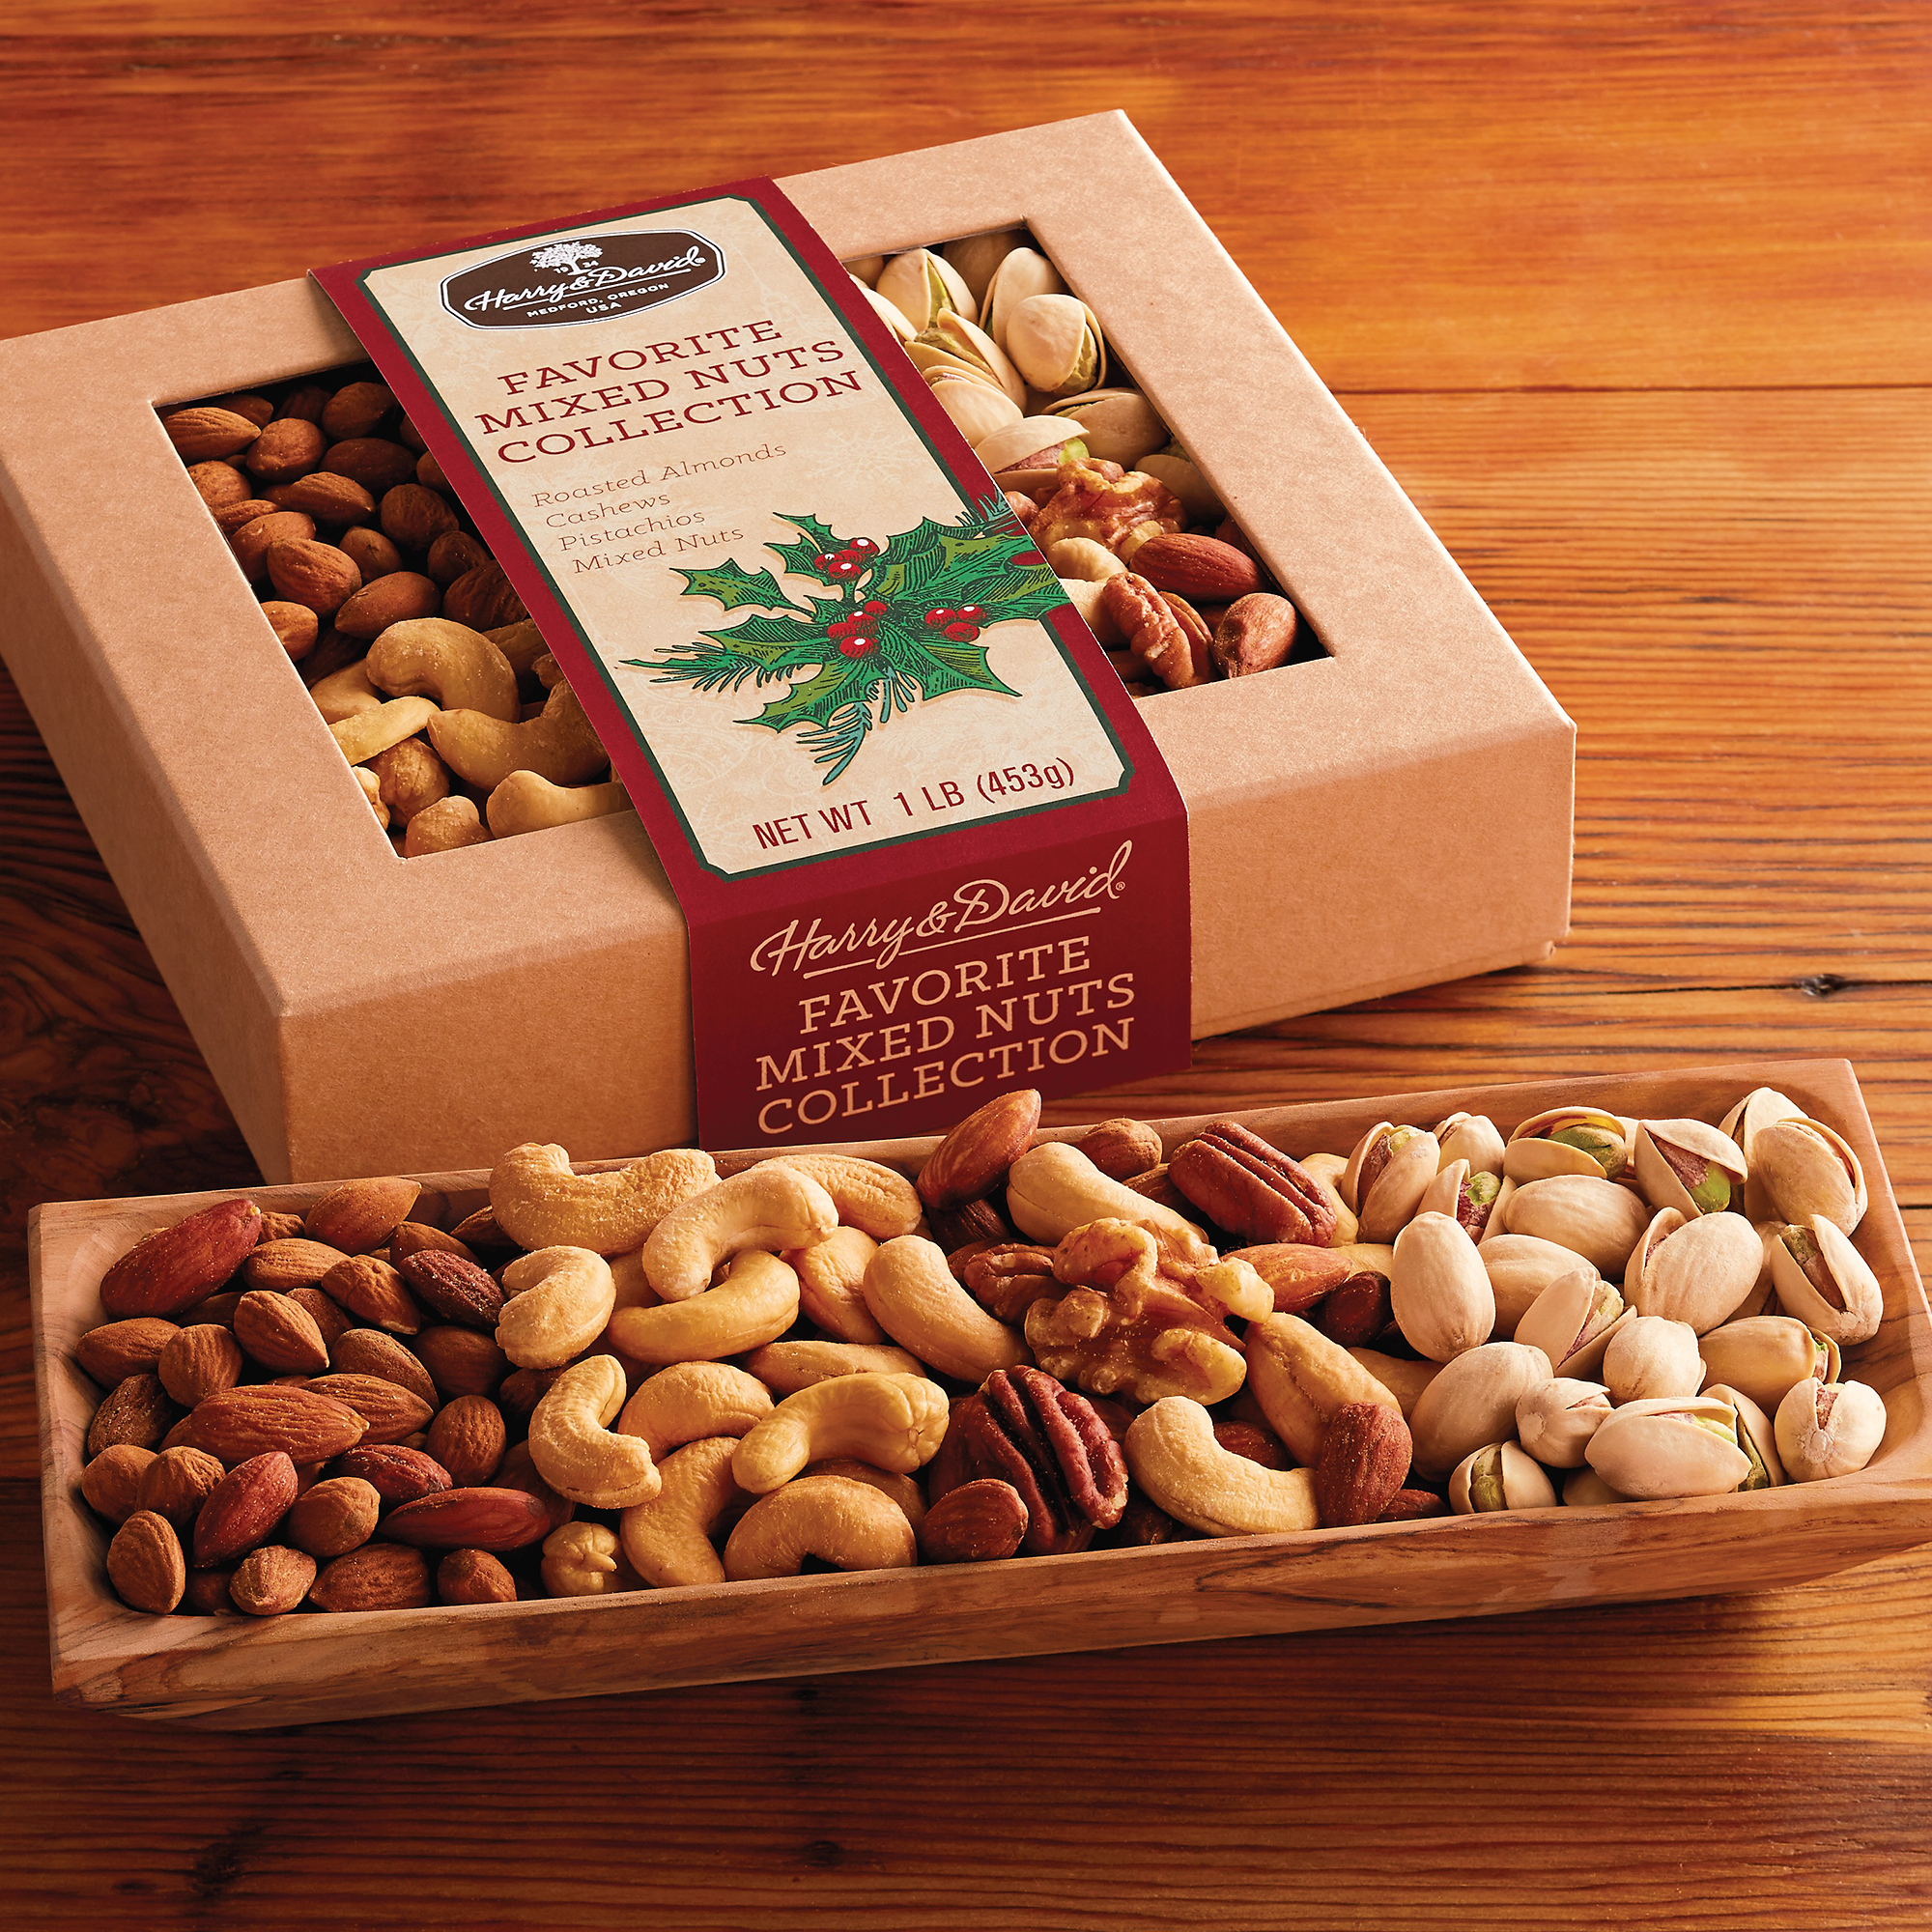 Collection Of Nuts Favorite Mixed Nuts Collection Harry David.